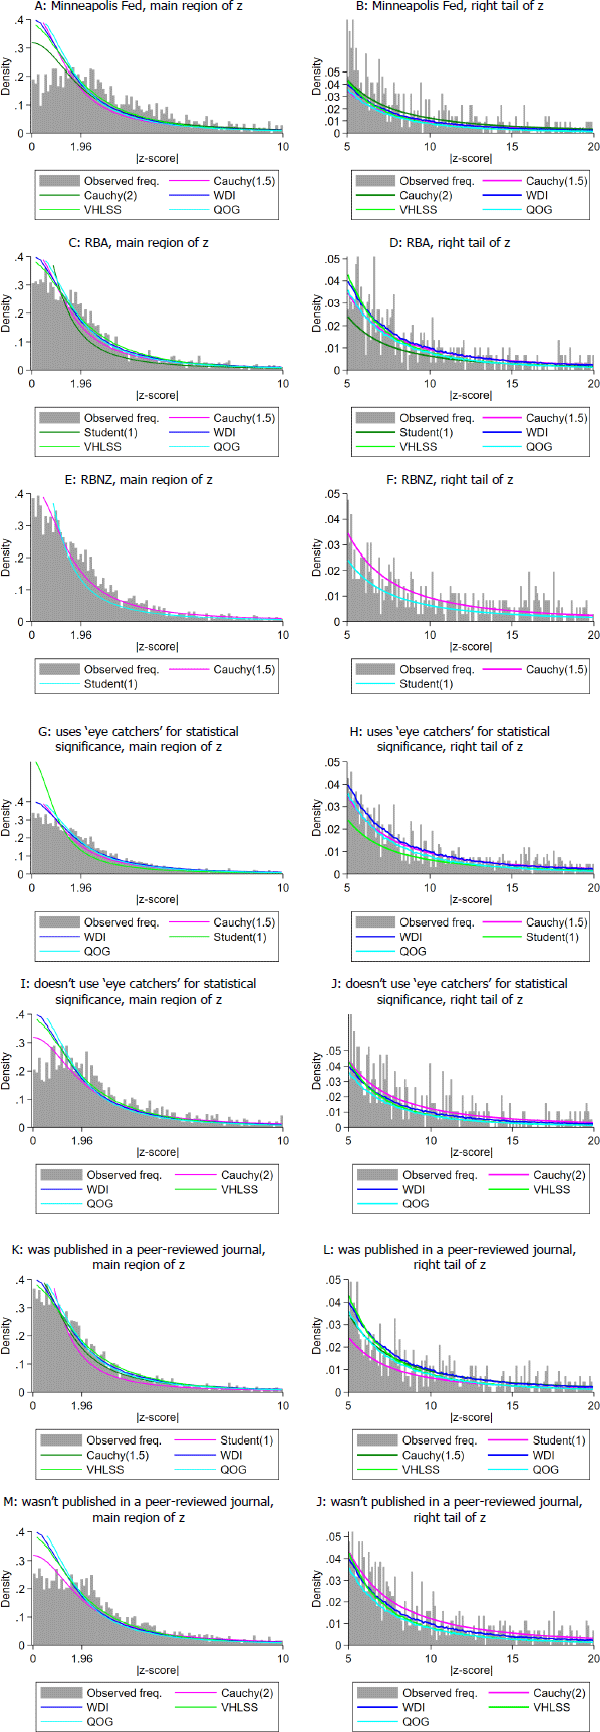 Figure A6: Observed Distributions of P[z|disseminated] and Plausible Bias-free Forms of P[z]